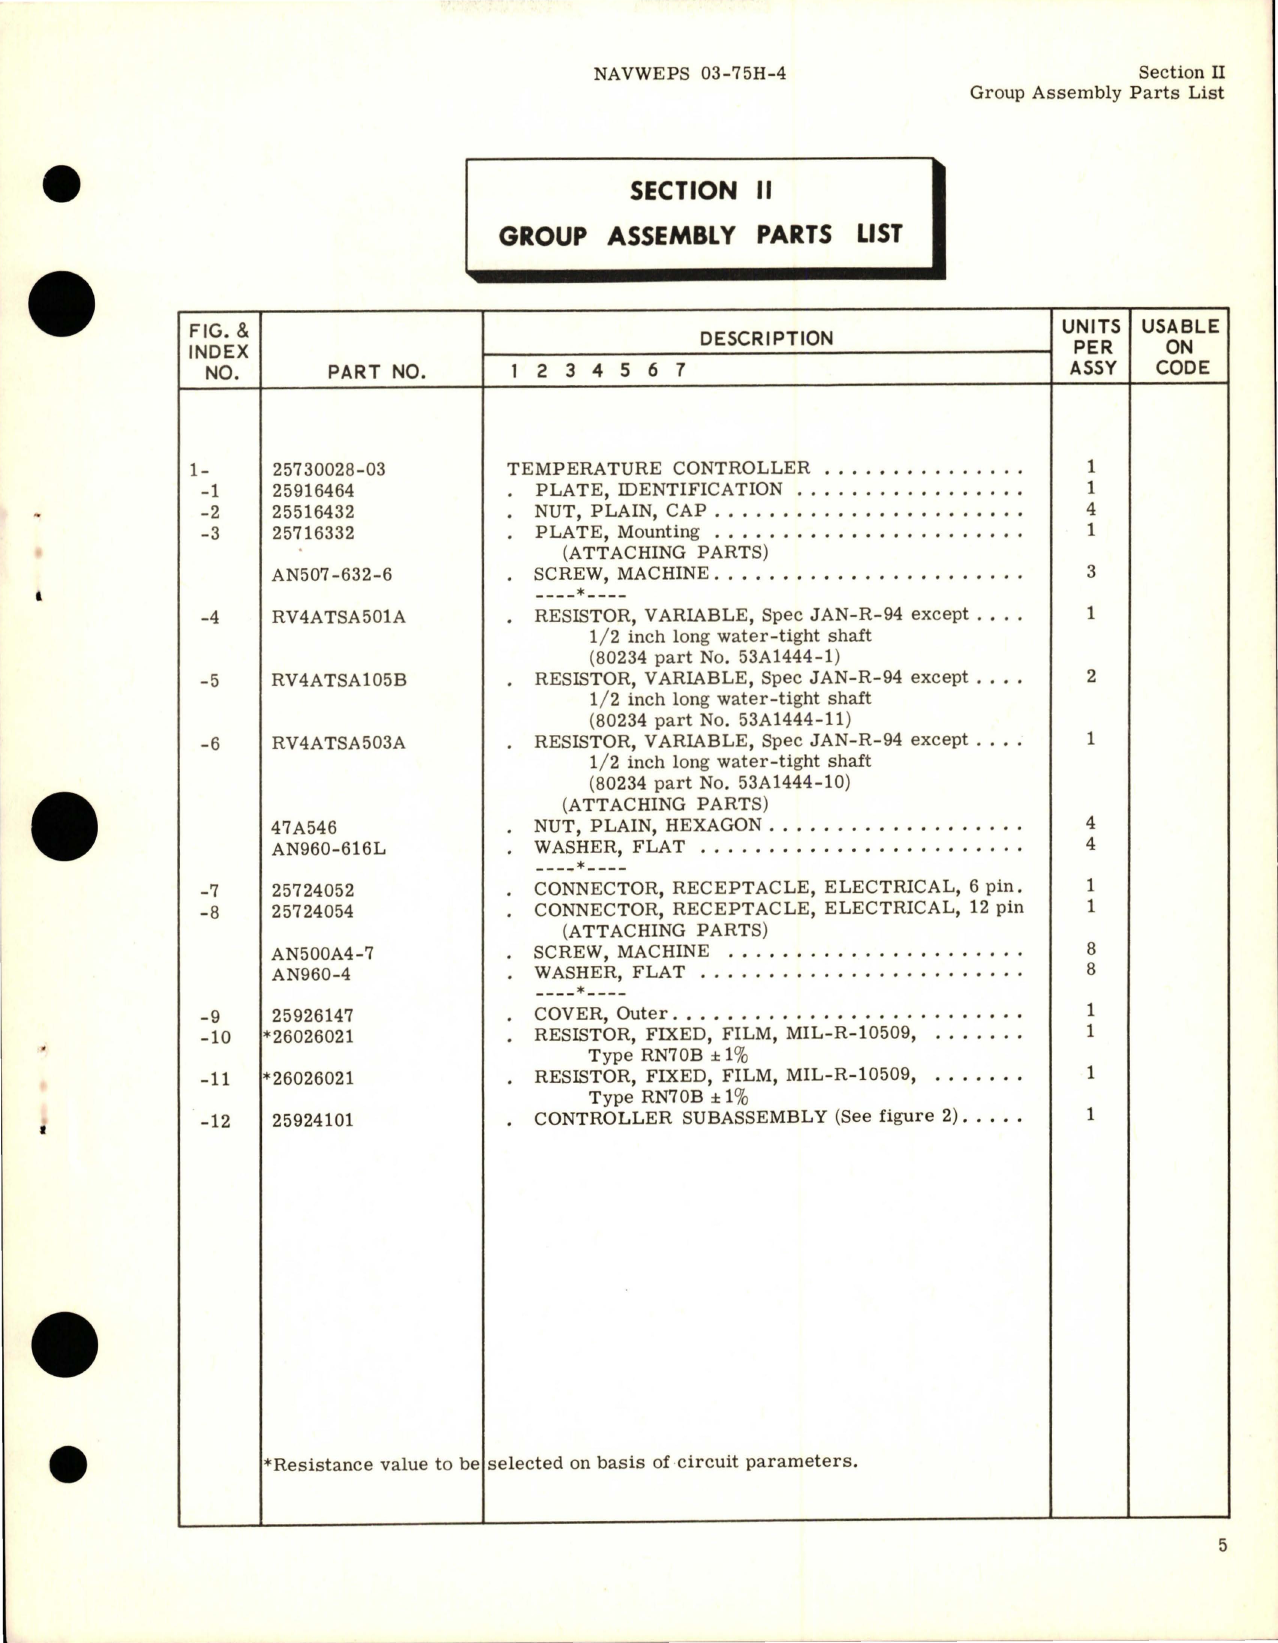 Sample page 7 from AirCorps Library document: Illustrated Parts Breakdown for Temperature Controller - Part 25730028-03